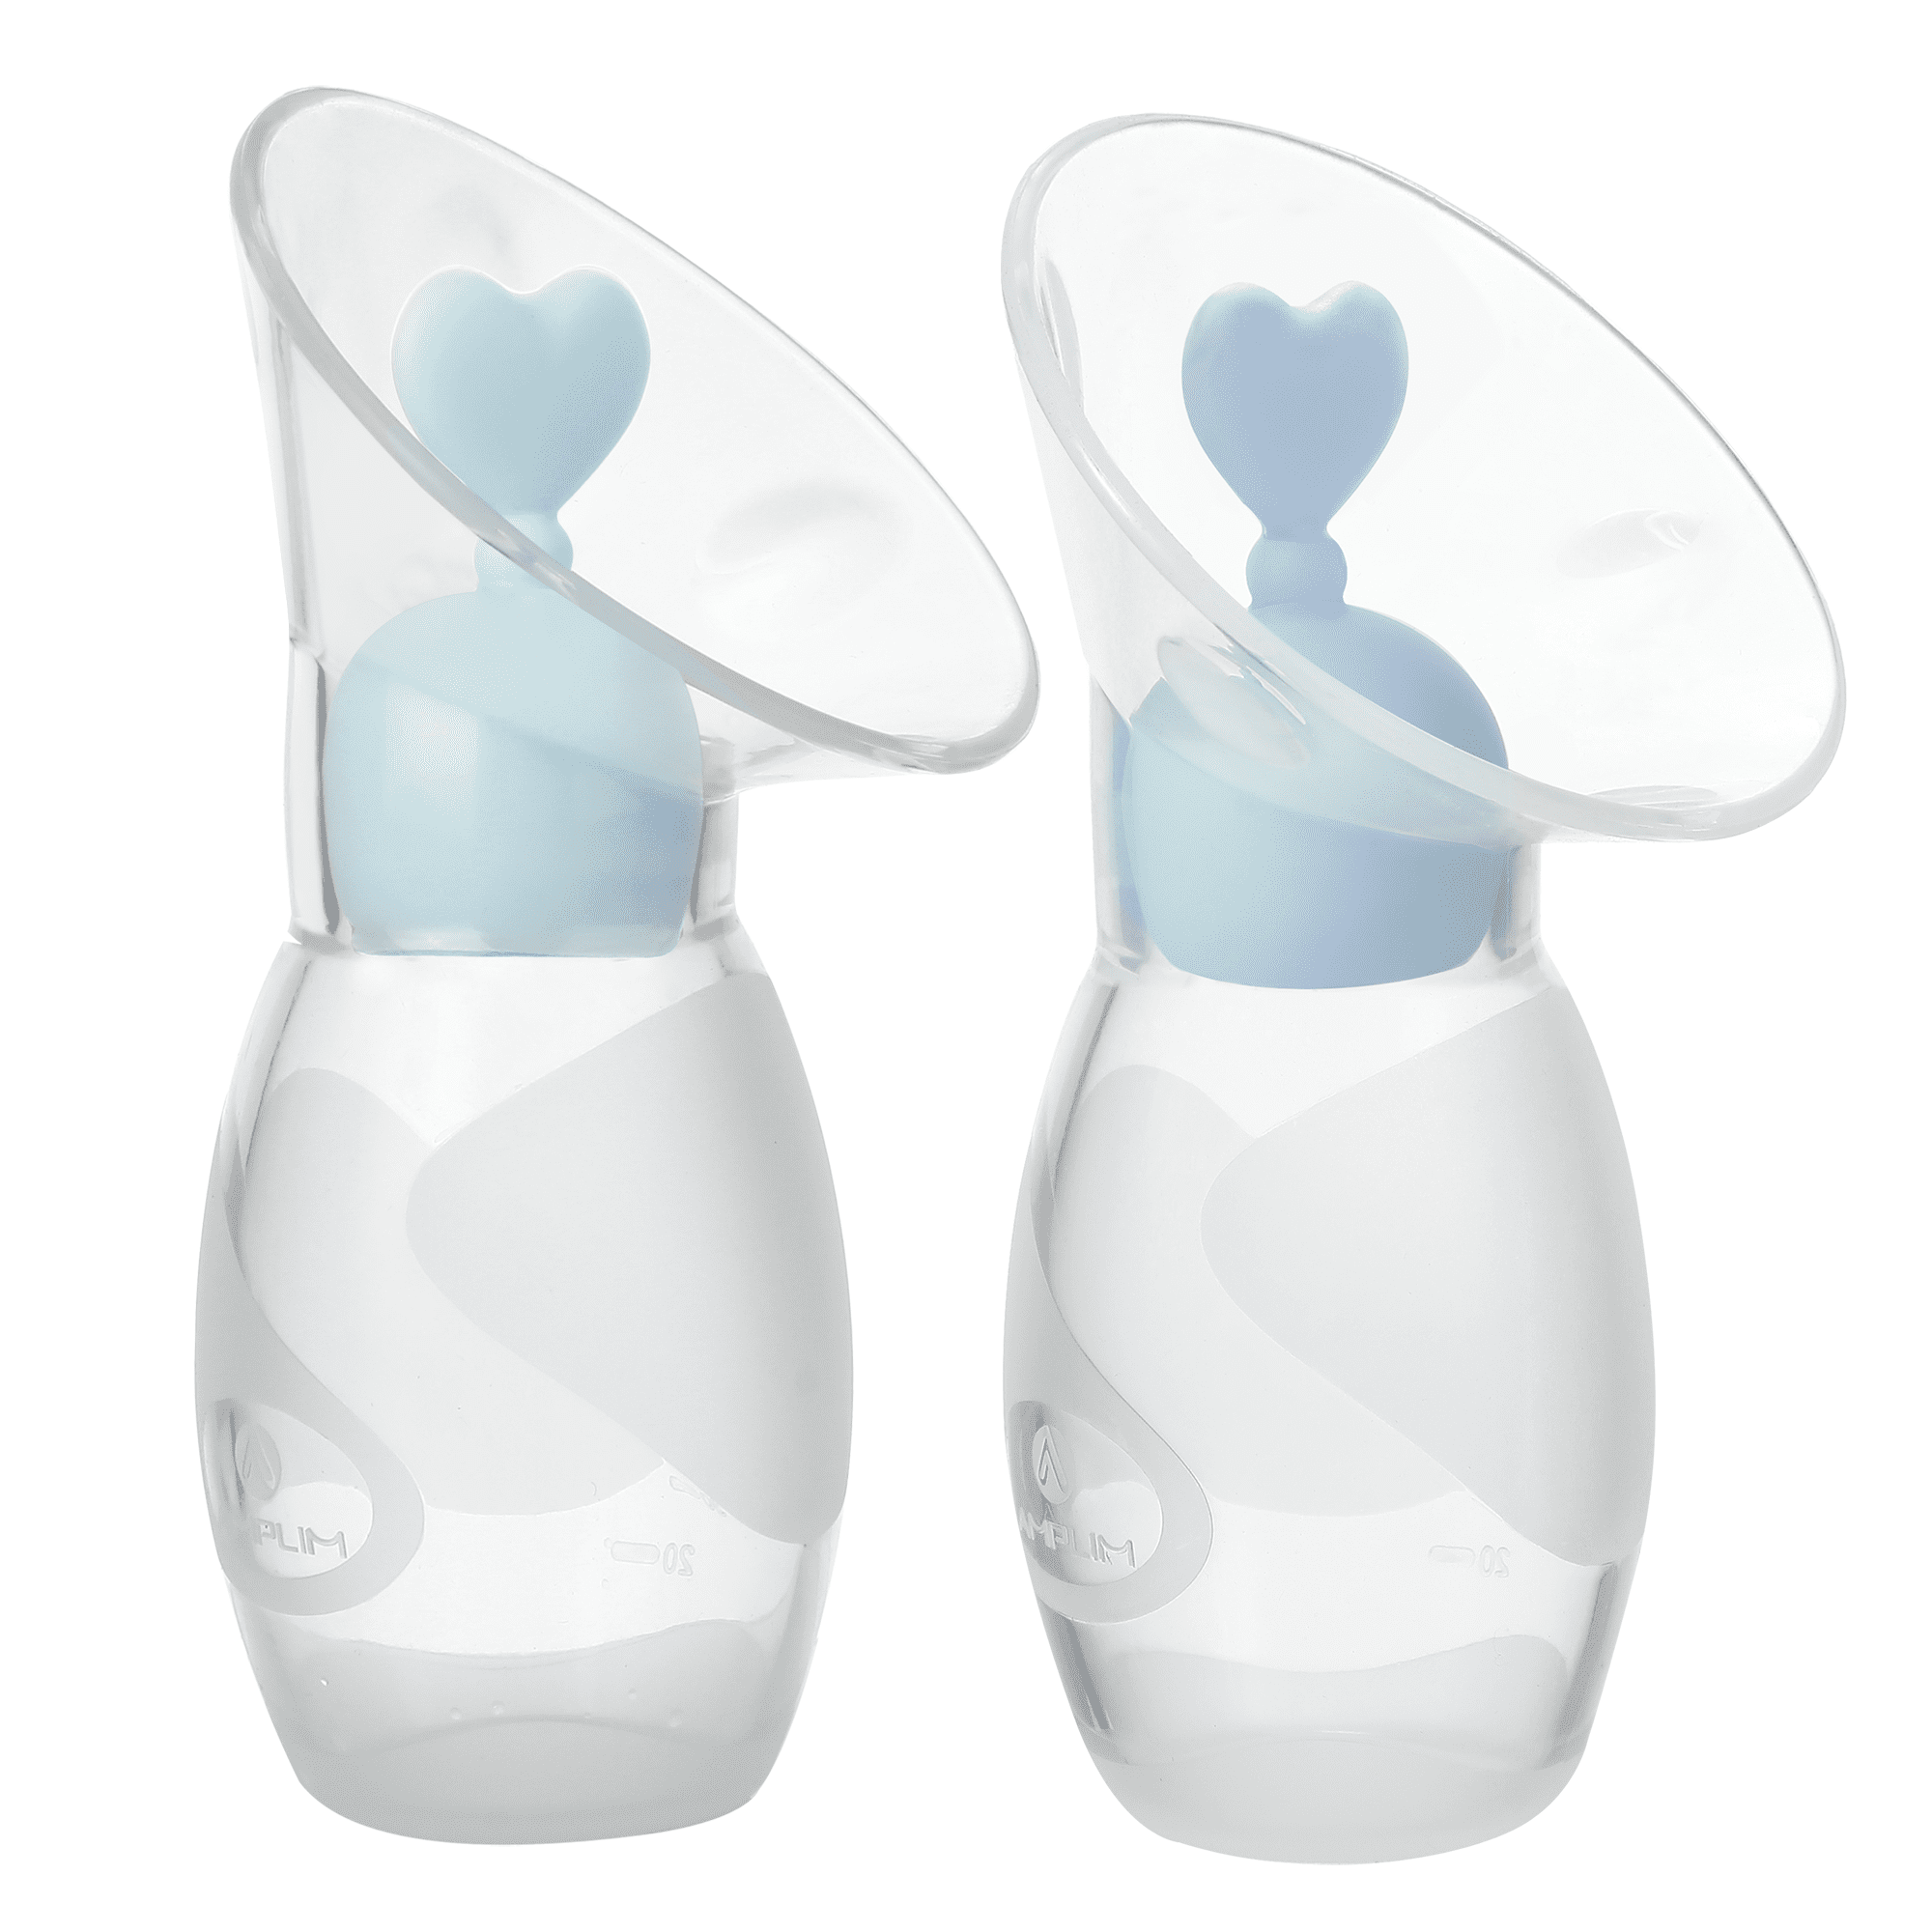 Amplim Manual Breast Pump Milk Collector with 2 Breastfeeding Milk Saver  Stoppers. Gen 2 Food Grade Silicone Breast Pump 4oz-100ml ，FSA HSA ， BPA  PVC Lead Phthalate Free , Pink, Blue 